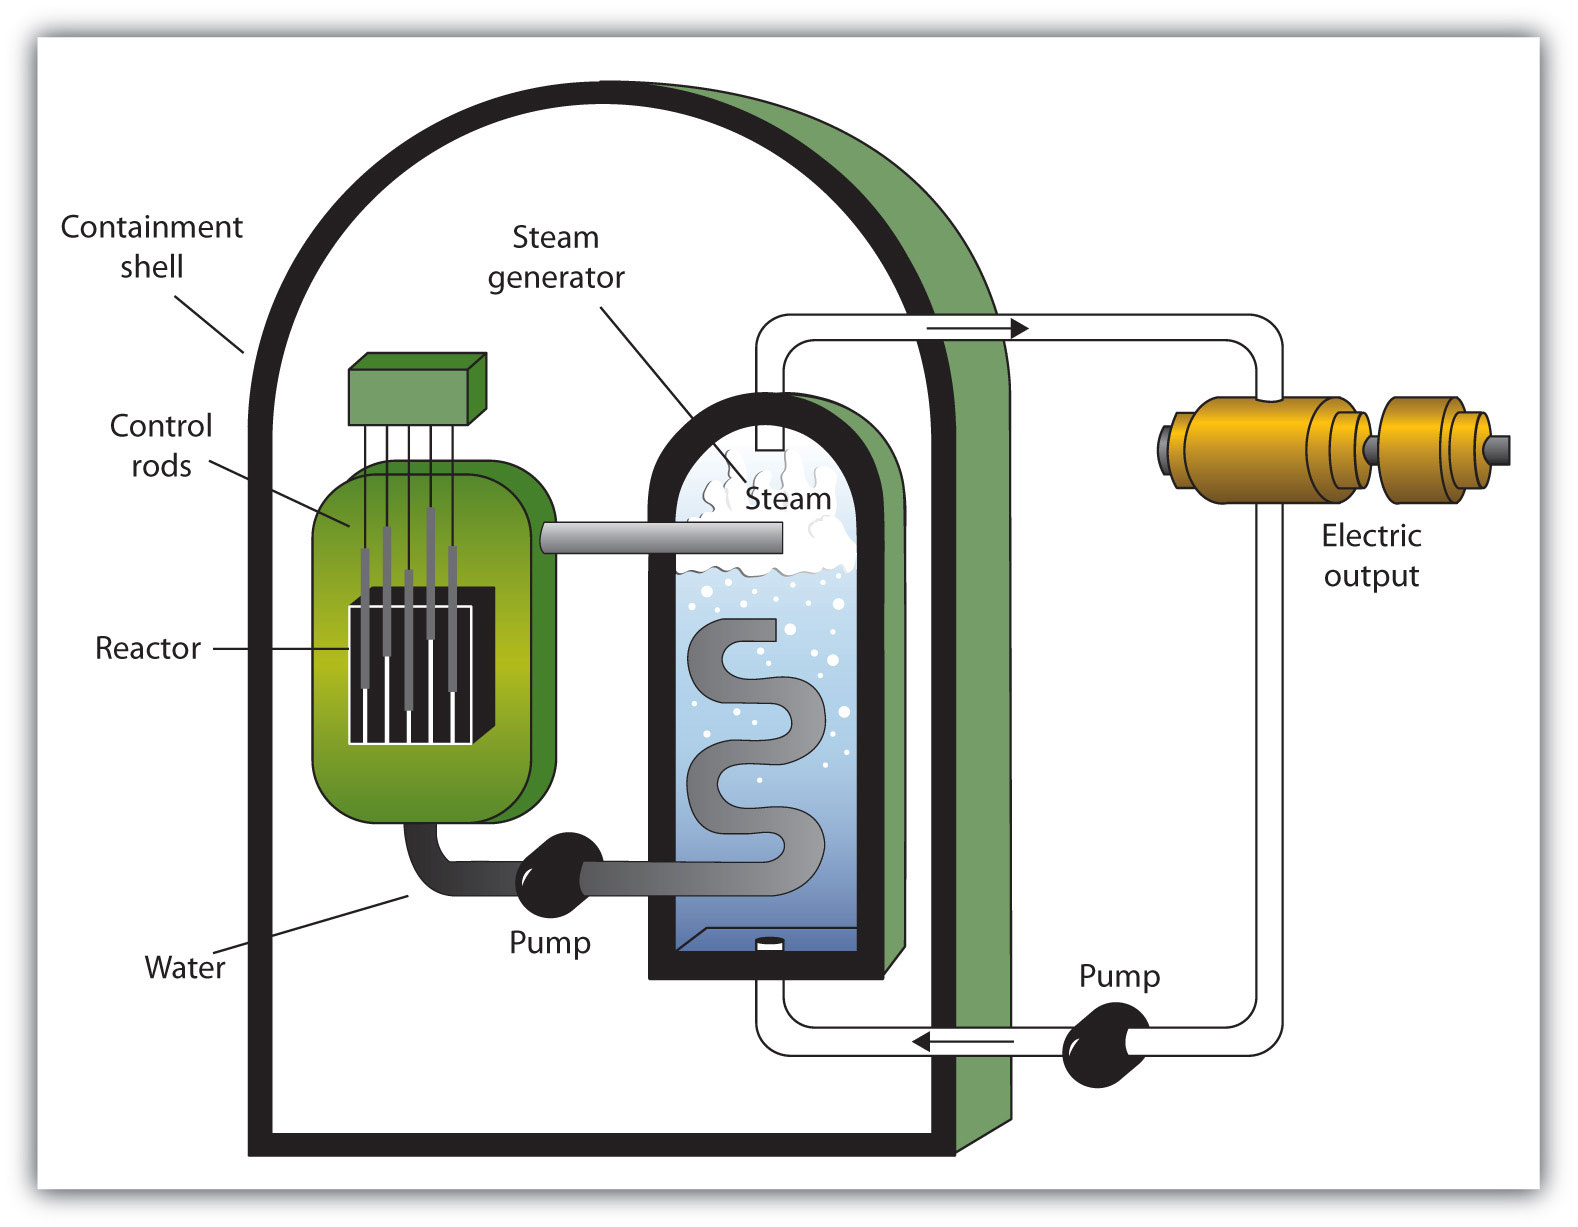 A Diagram of a Nuclear Power Plant for Generating Electricity